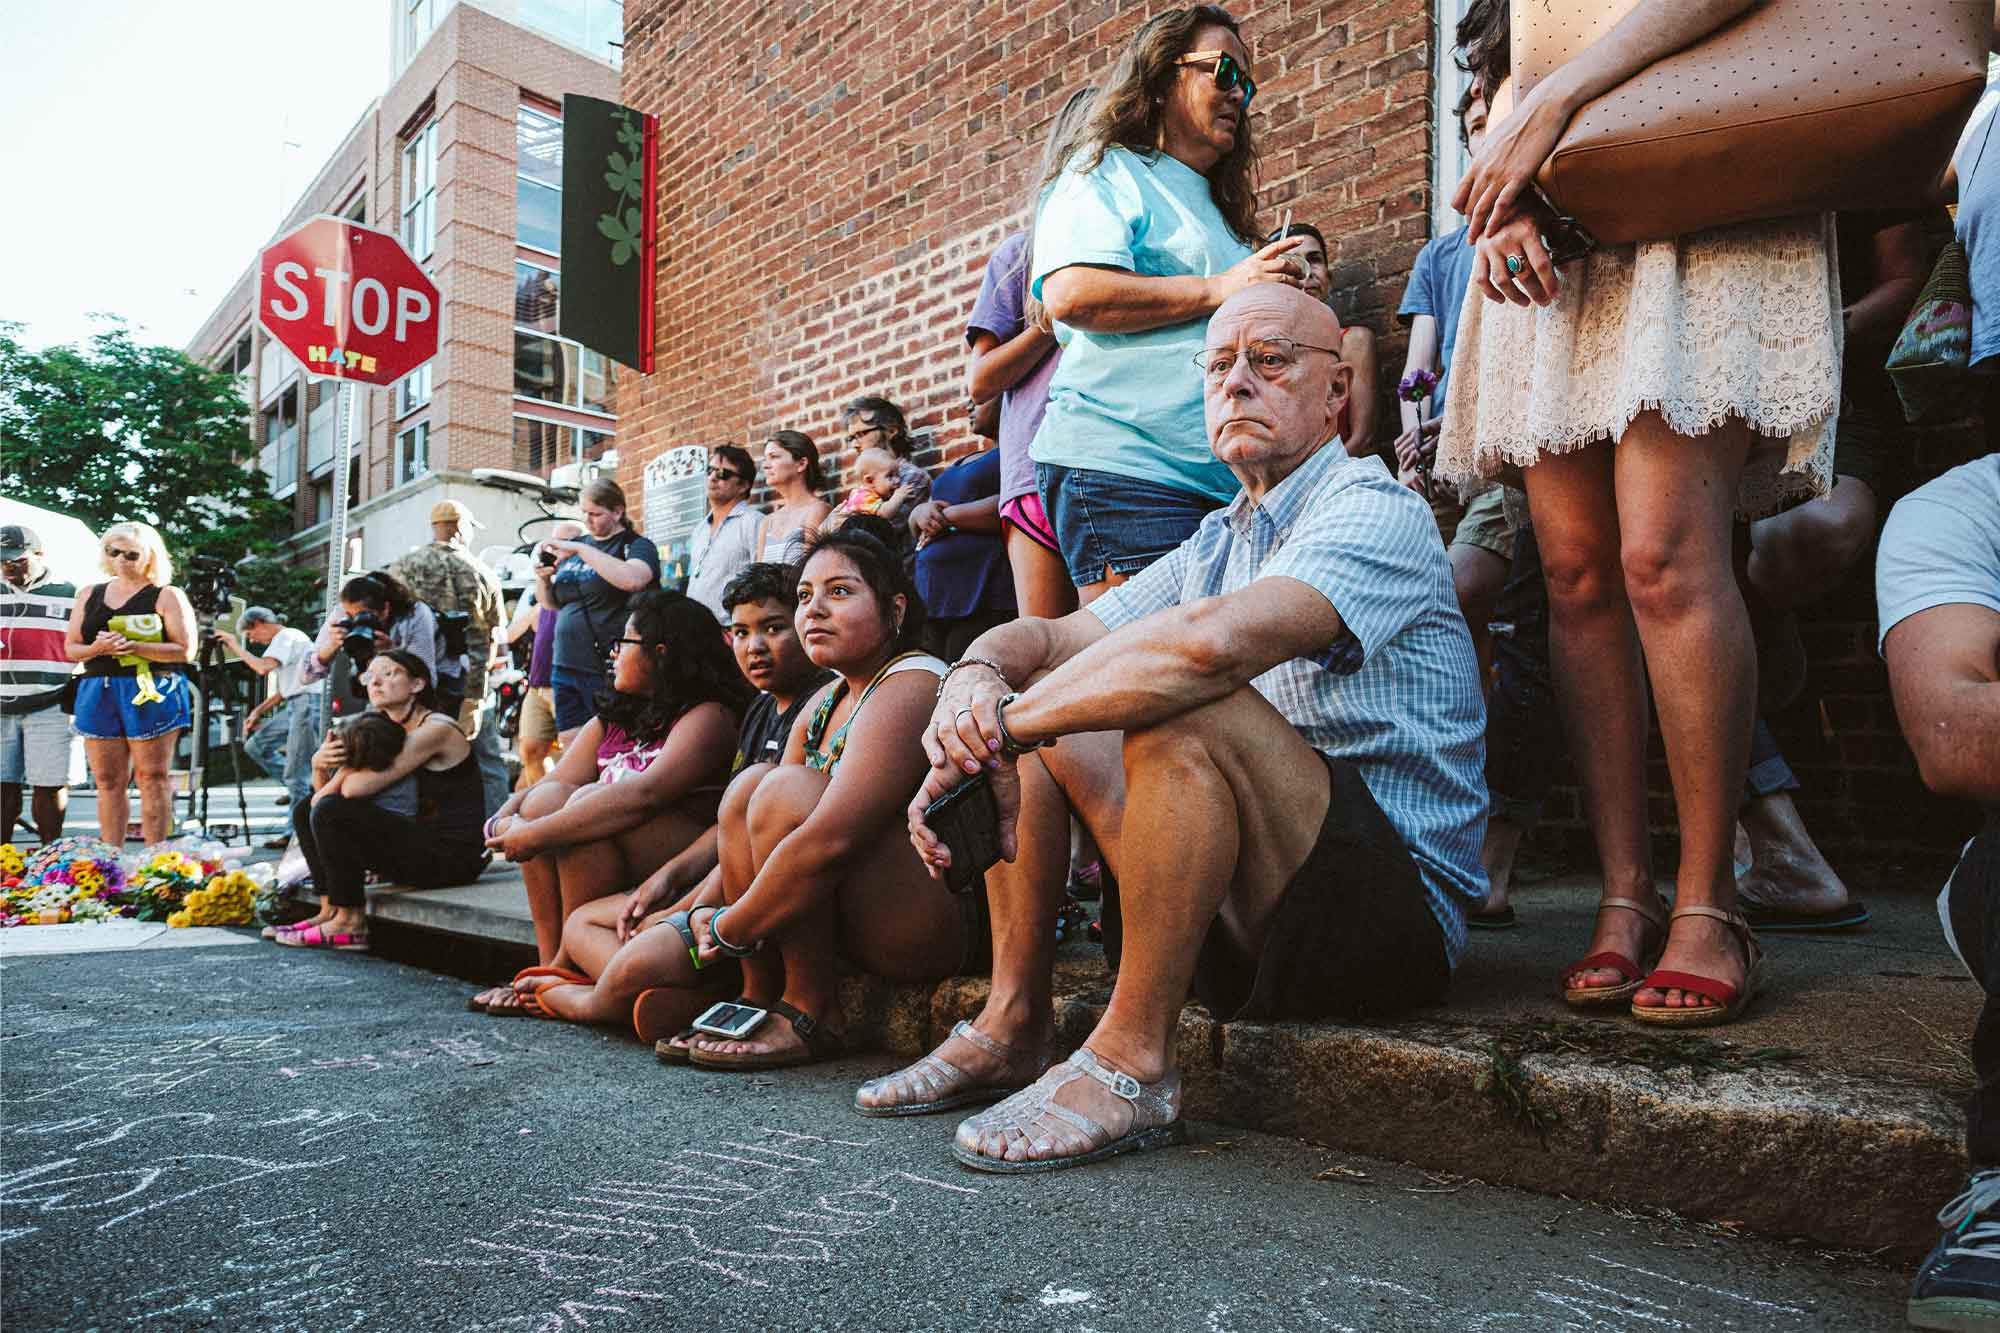 People sit on a curb in front of a brick building looking mournful.